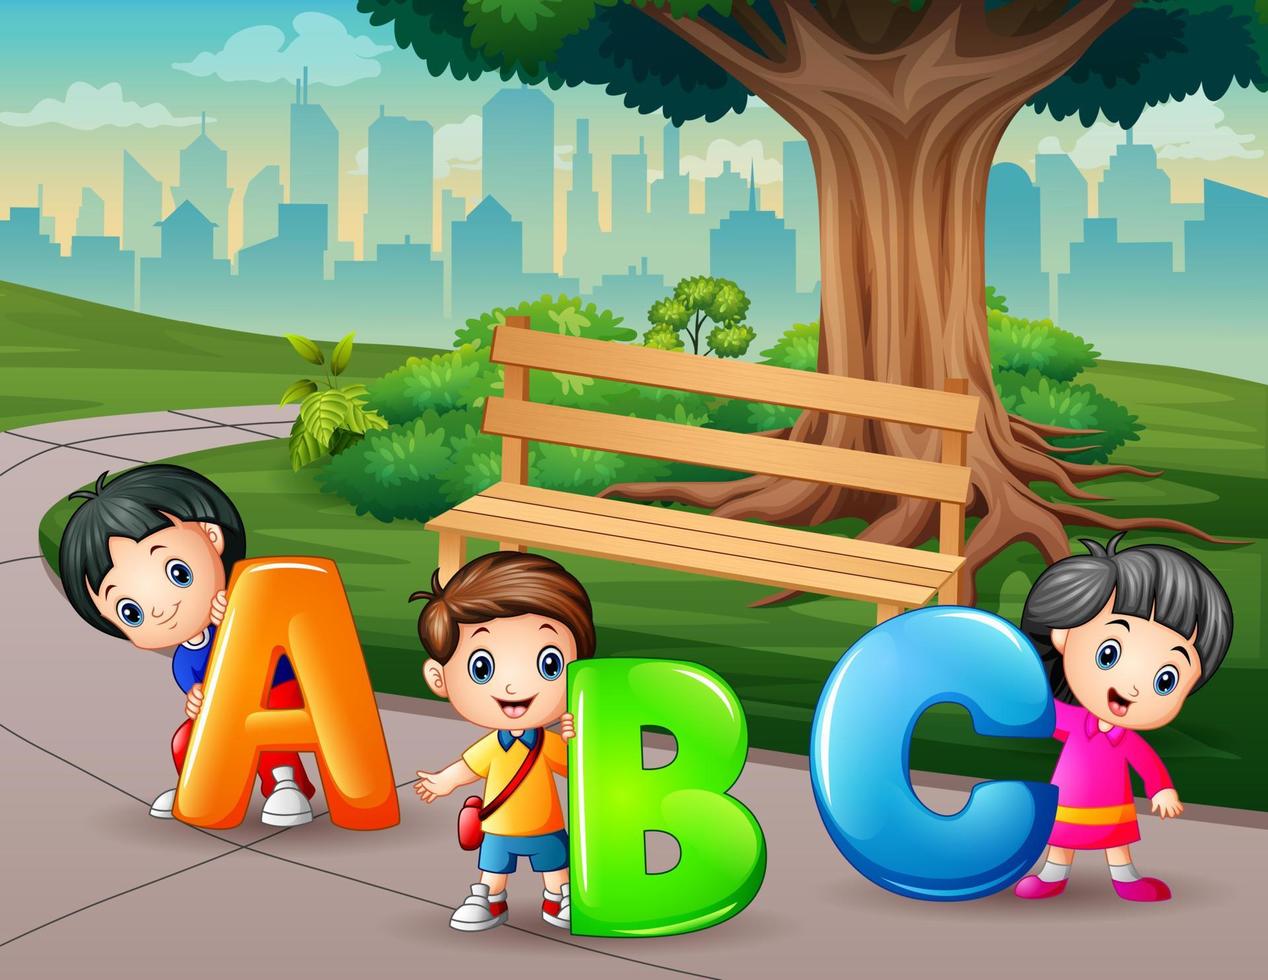 Happy kids carrying the letters ABC in the garden illustration vector